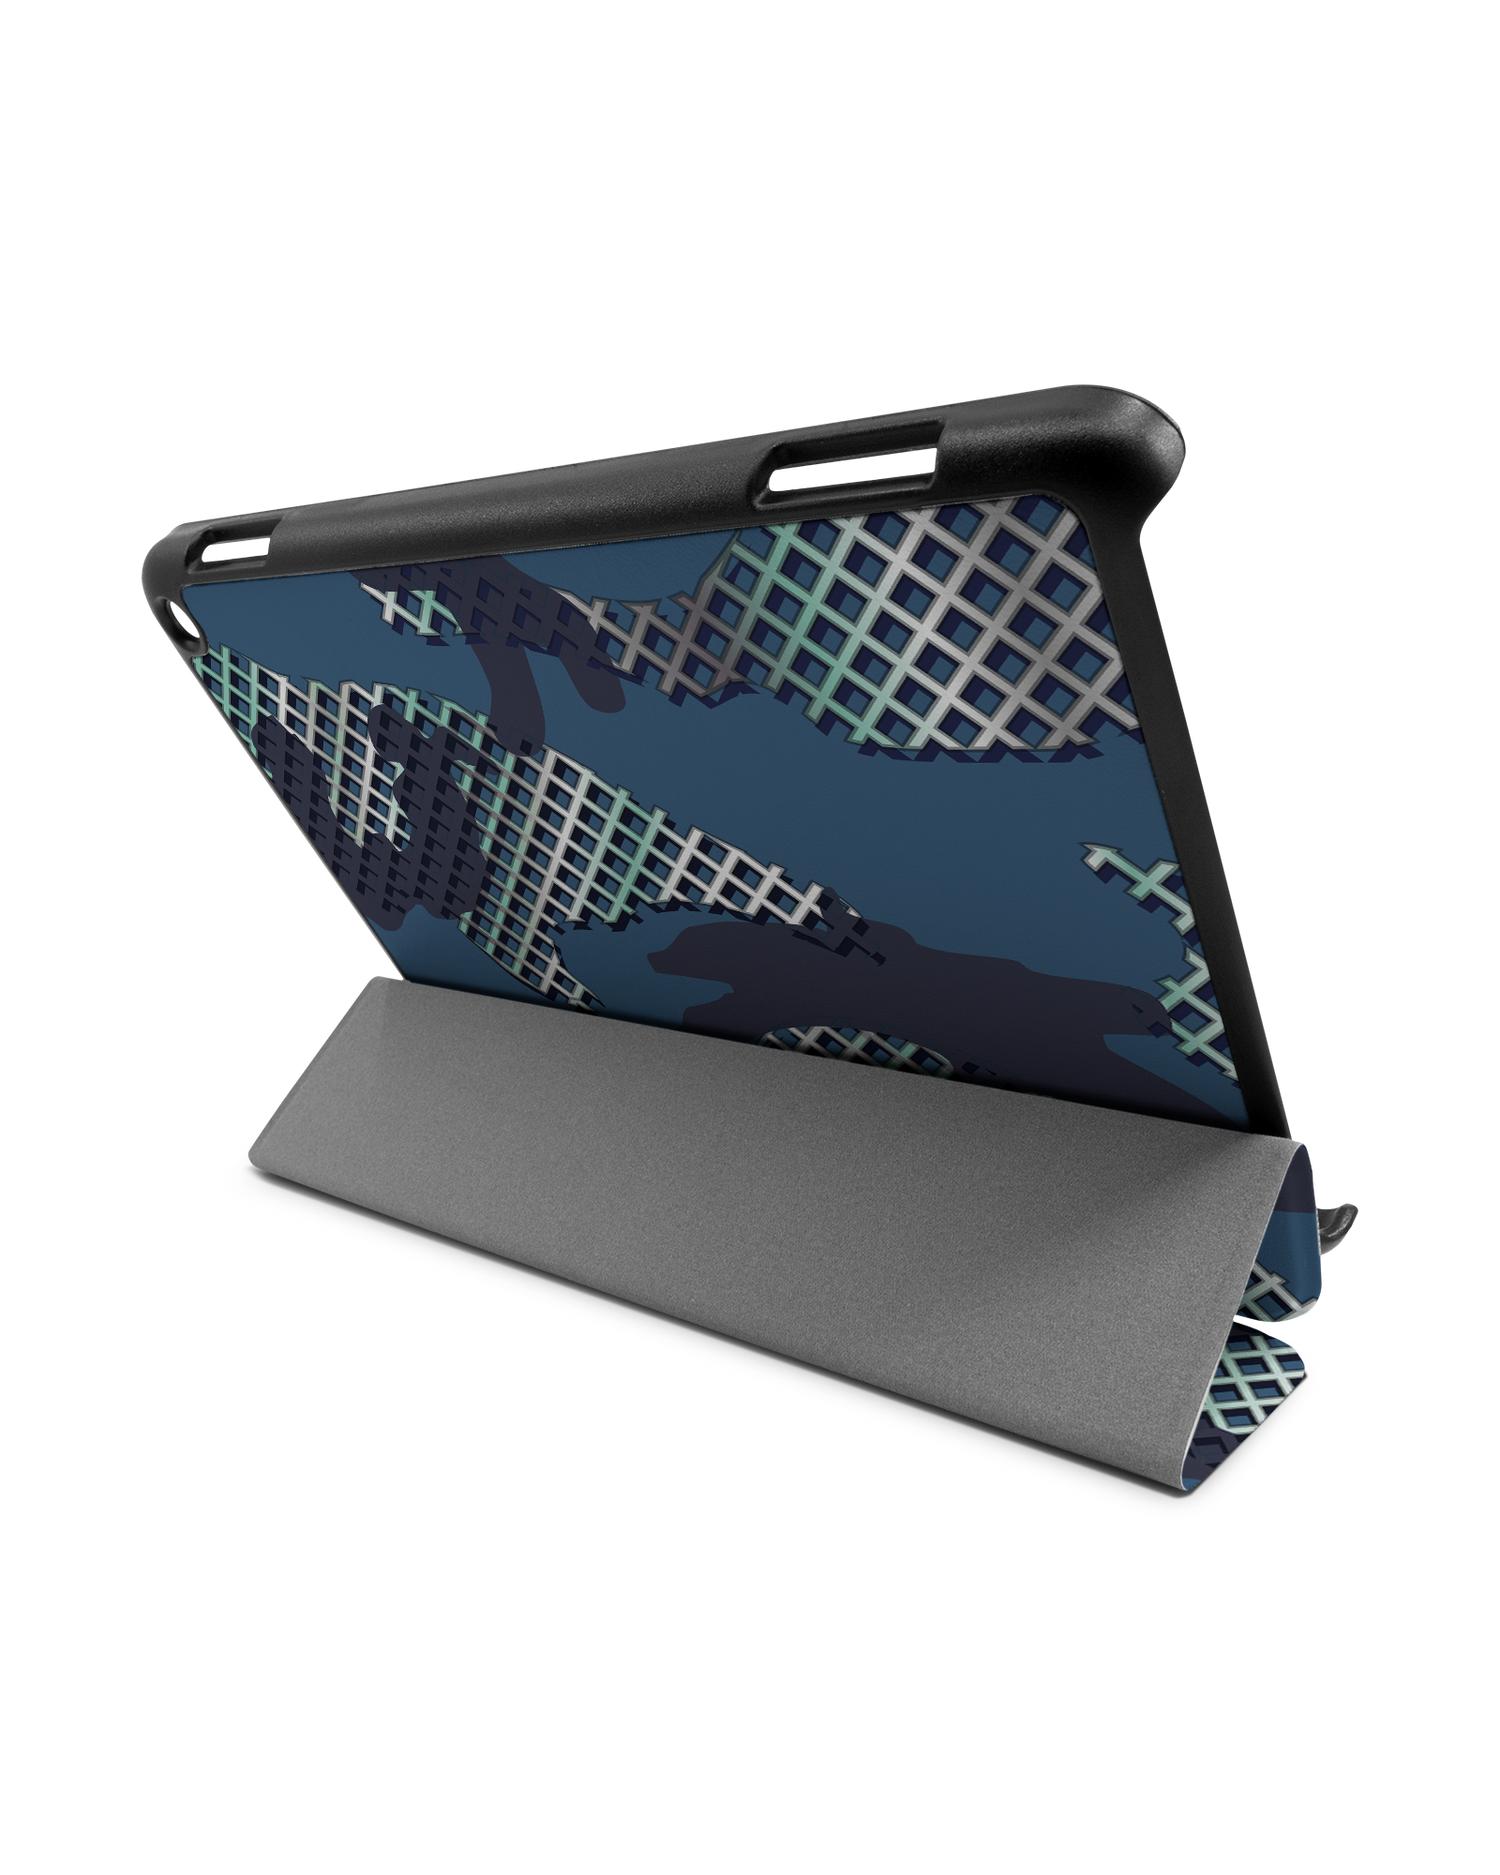 Fall Camo I Tablet Smart Case for Amazon Fire HD 8 (2022), Amazon Fire HD 8 Plus (2022), Amazon Fire HD 8 (2020), Amazon Fire HD 8 Plus (2020): Used as Stand